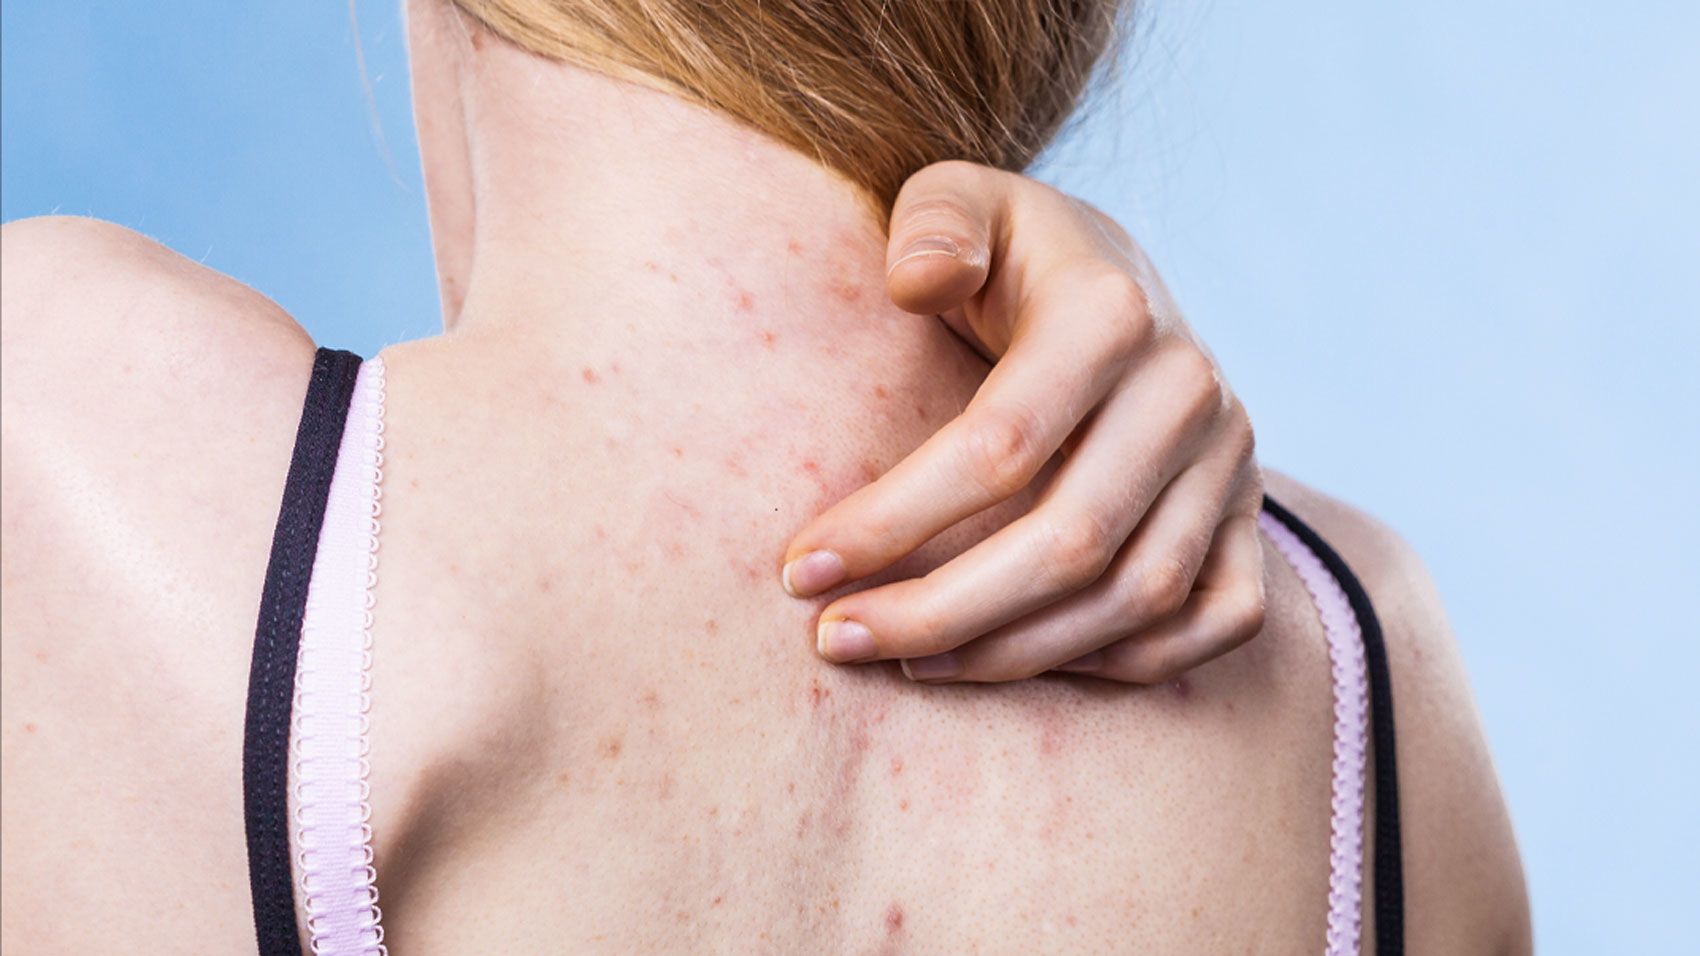 How to get rid of acne, according to a dermatologist - CNET